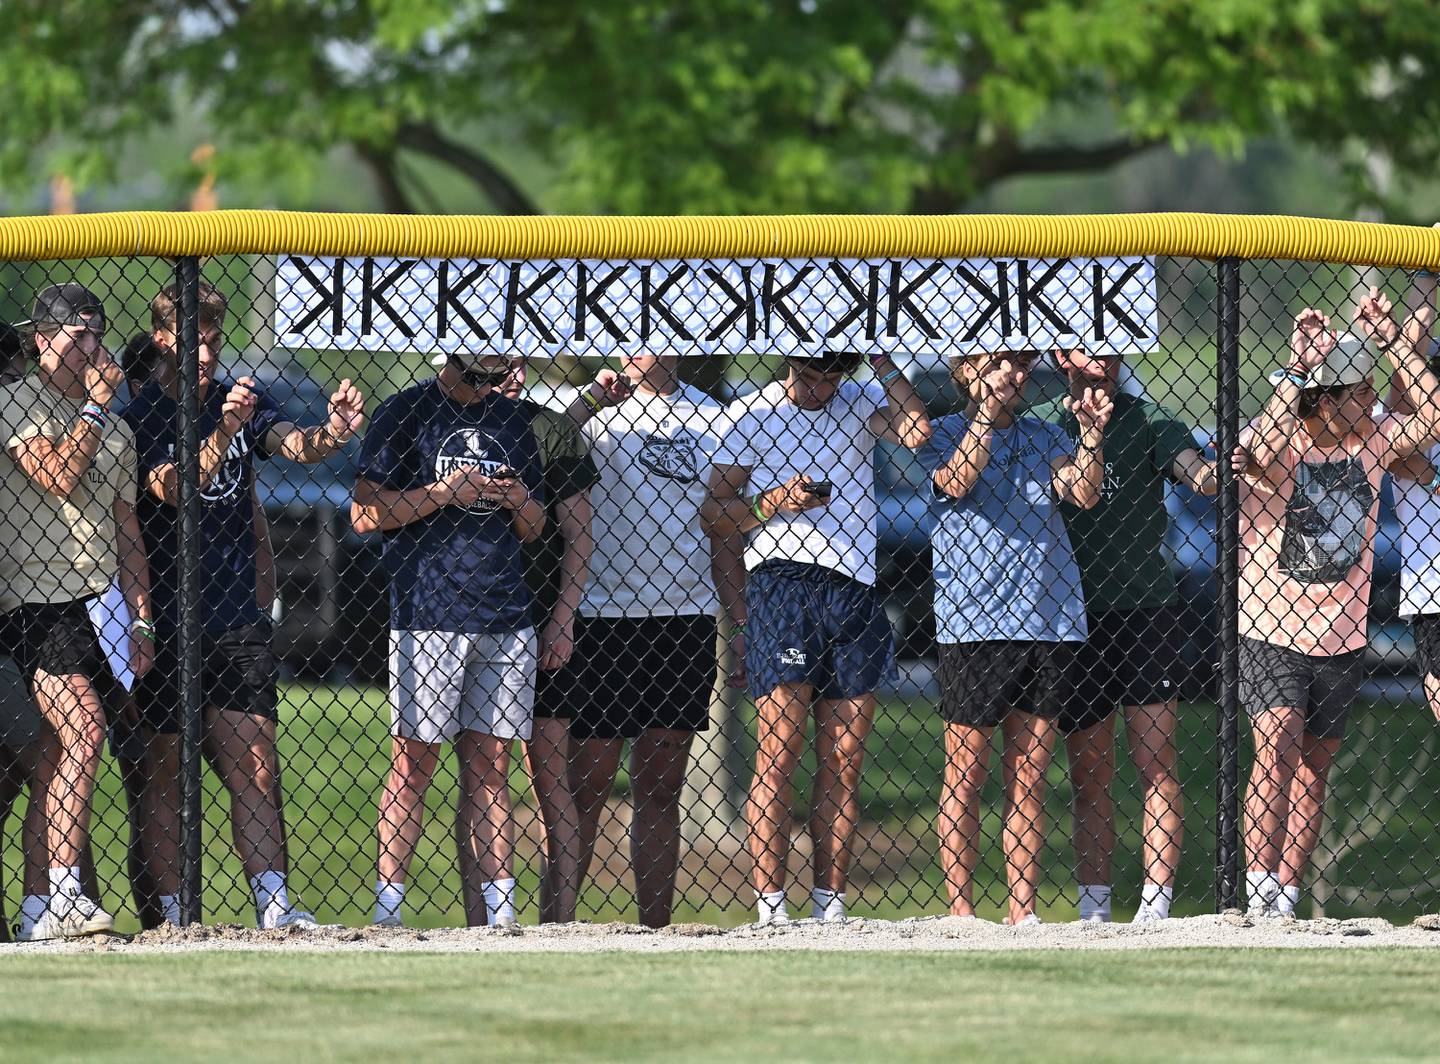 Lemont's fans tallying up the strikes during the Lemont Class 3A Sectional Final game against Ottawa on Friday, June 2, 2023, at Lemont.